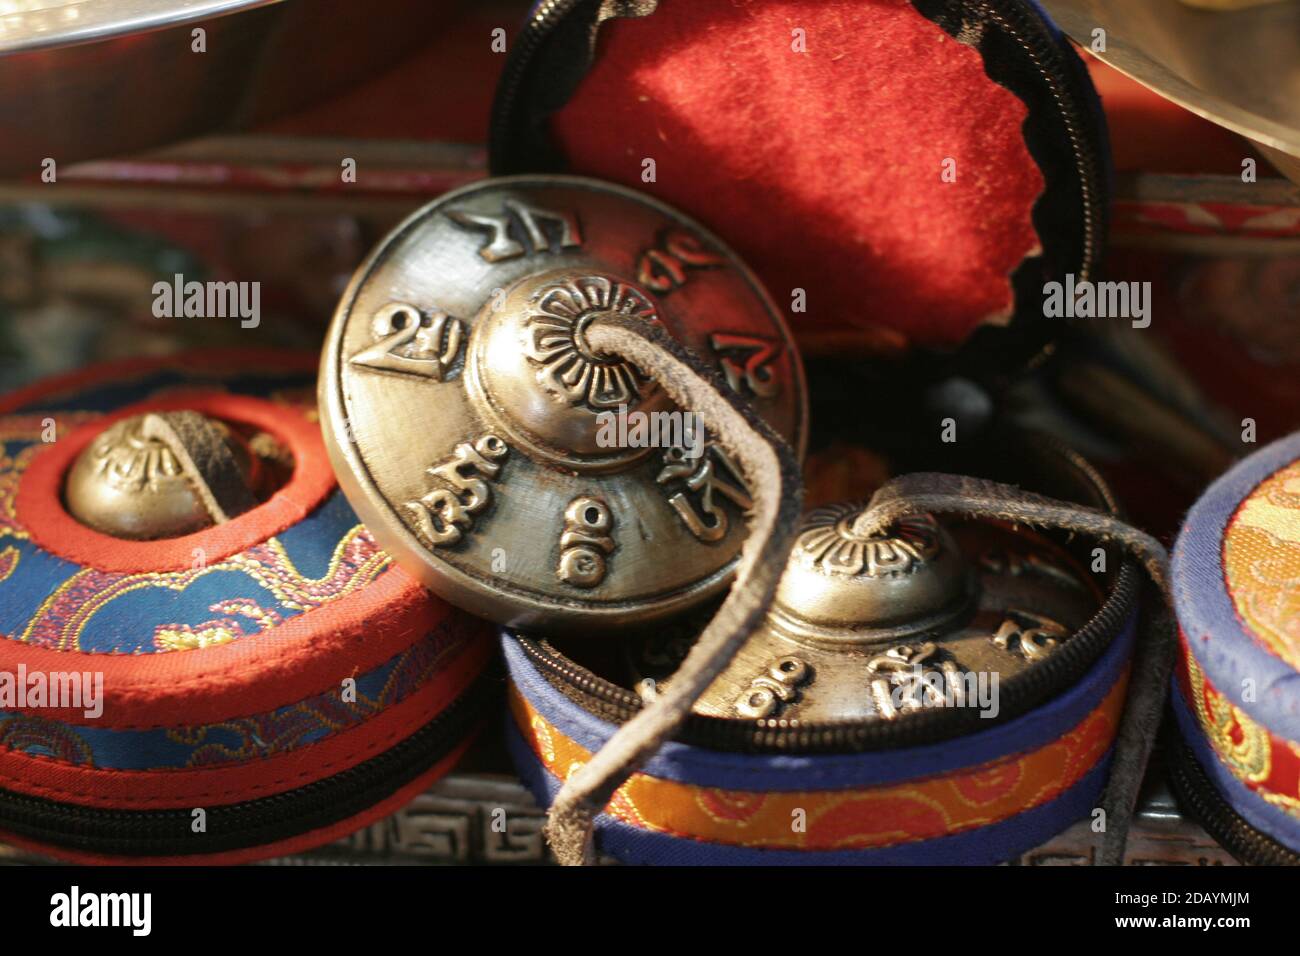 Small cymbals used in worship in Buddhist monasteries in Tibet Stock Photo